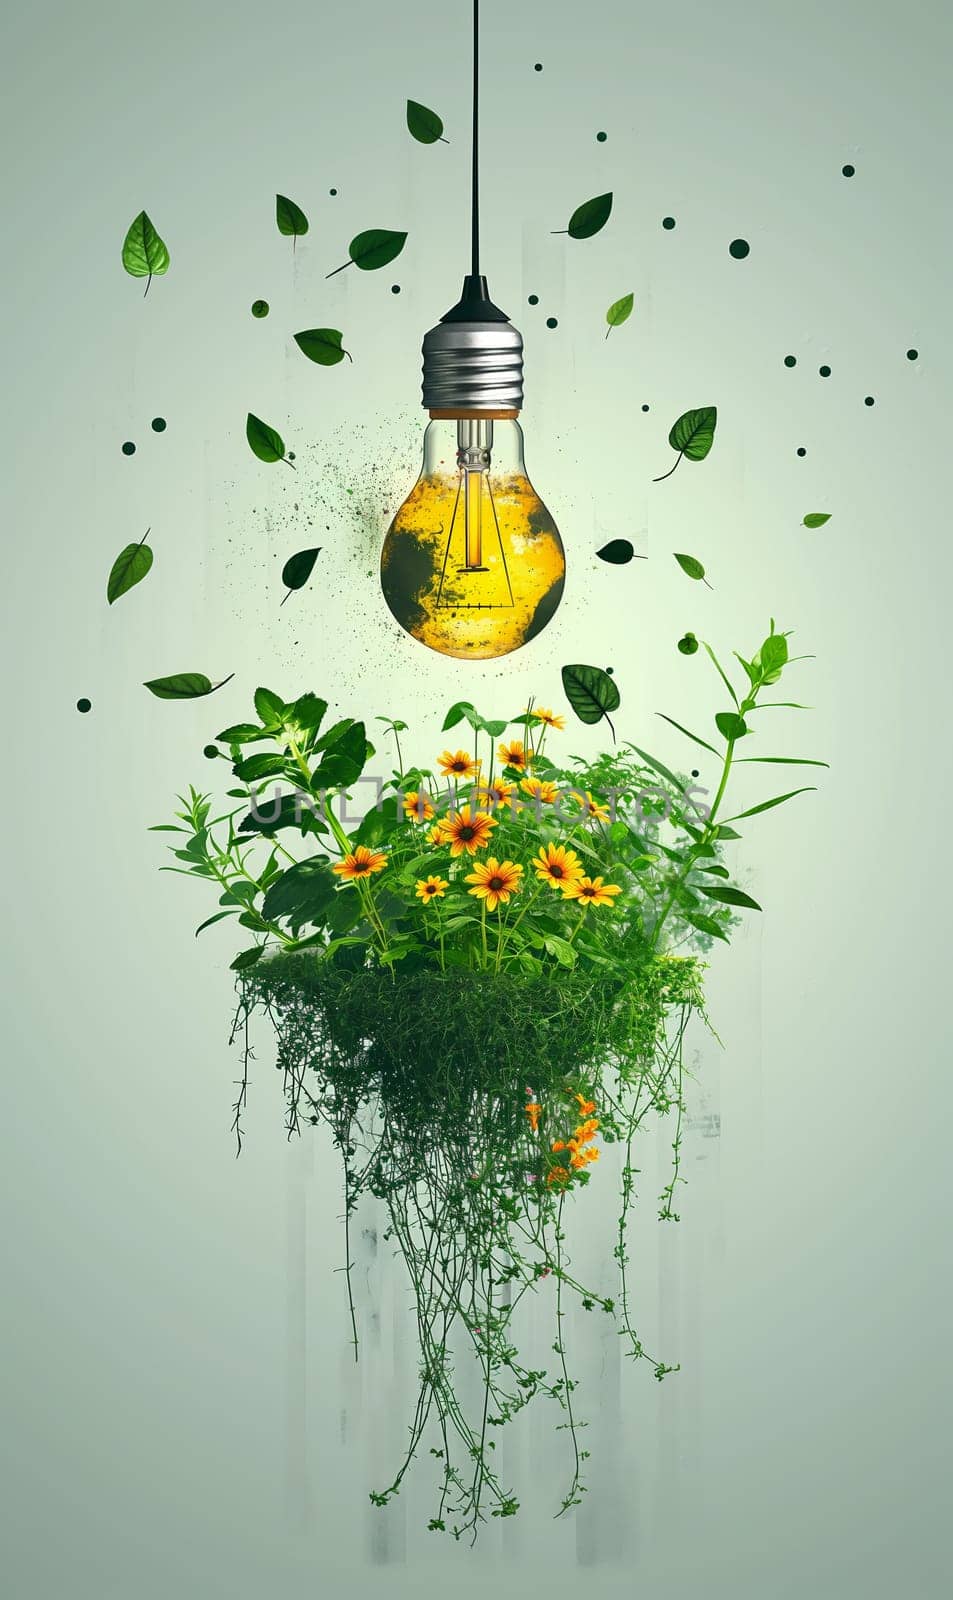 Green energy concept. A light bulb hanging above the plants. by Fischeron